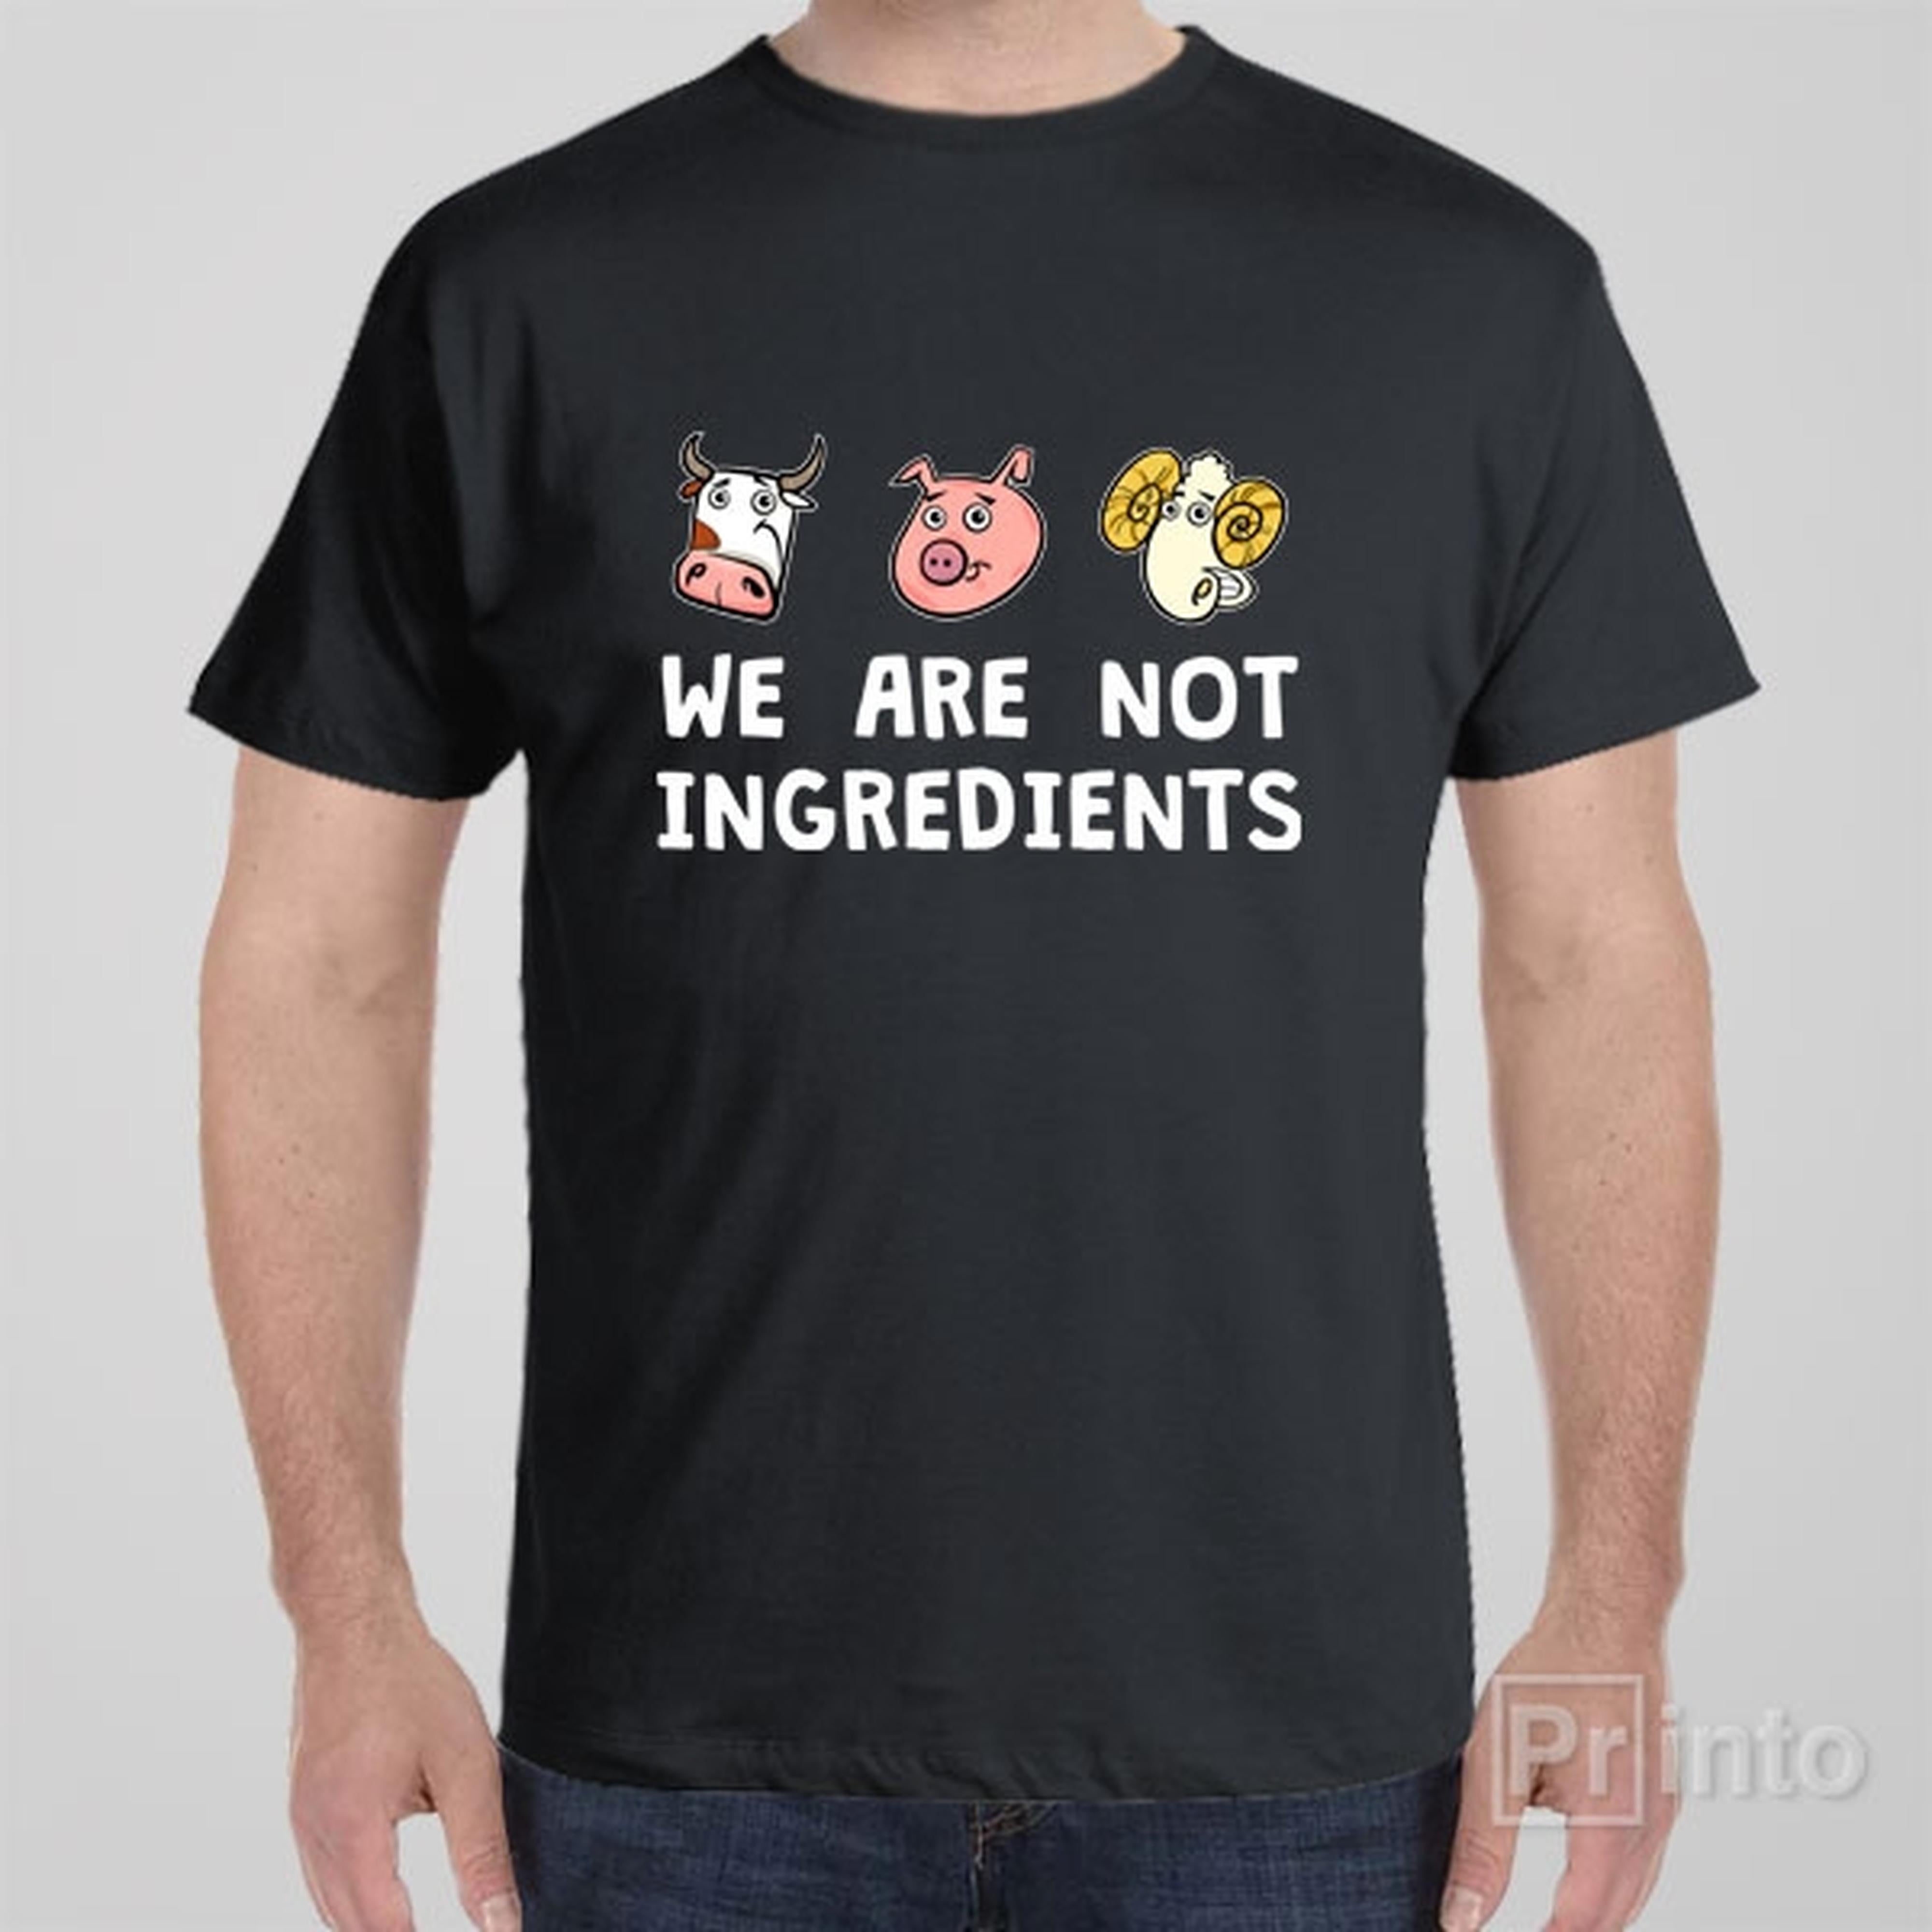 we-are-not-ingredients-t-shirt